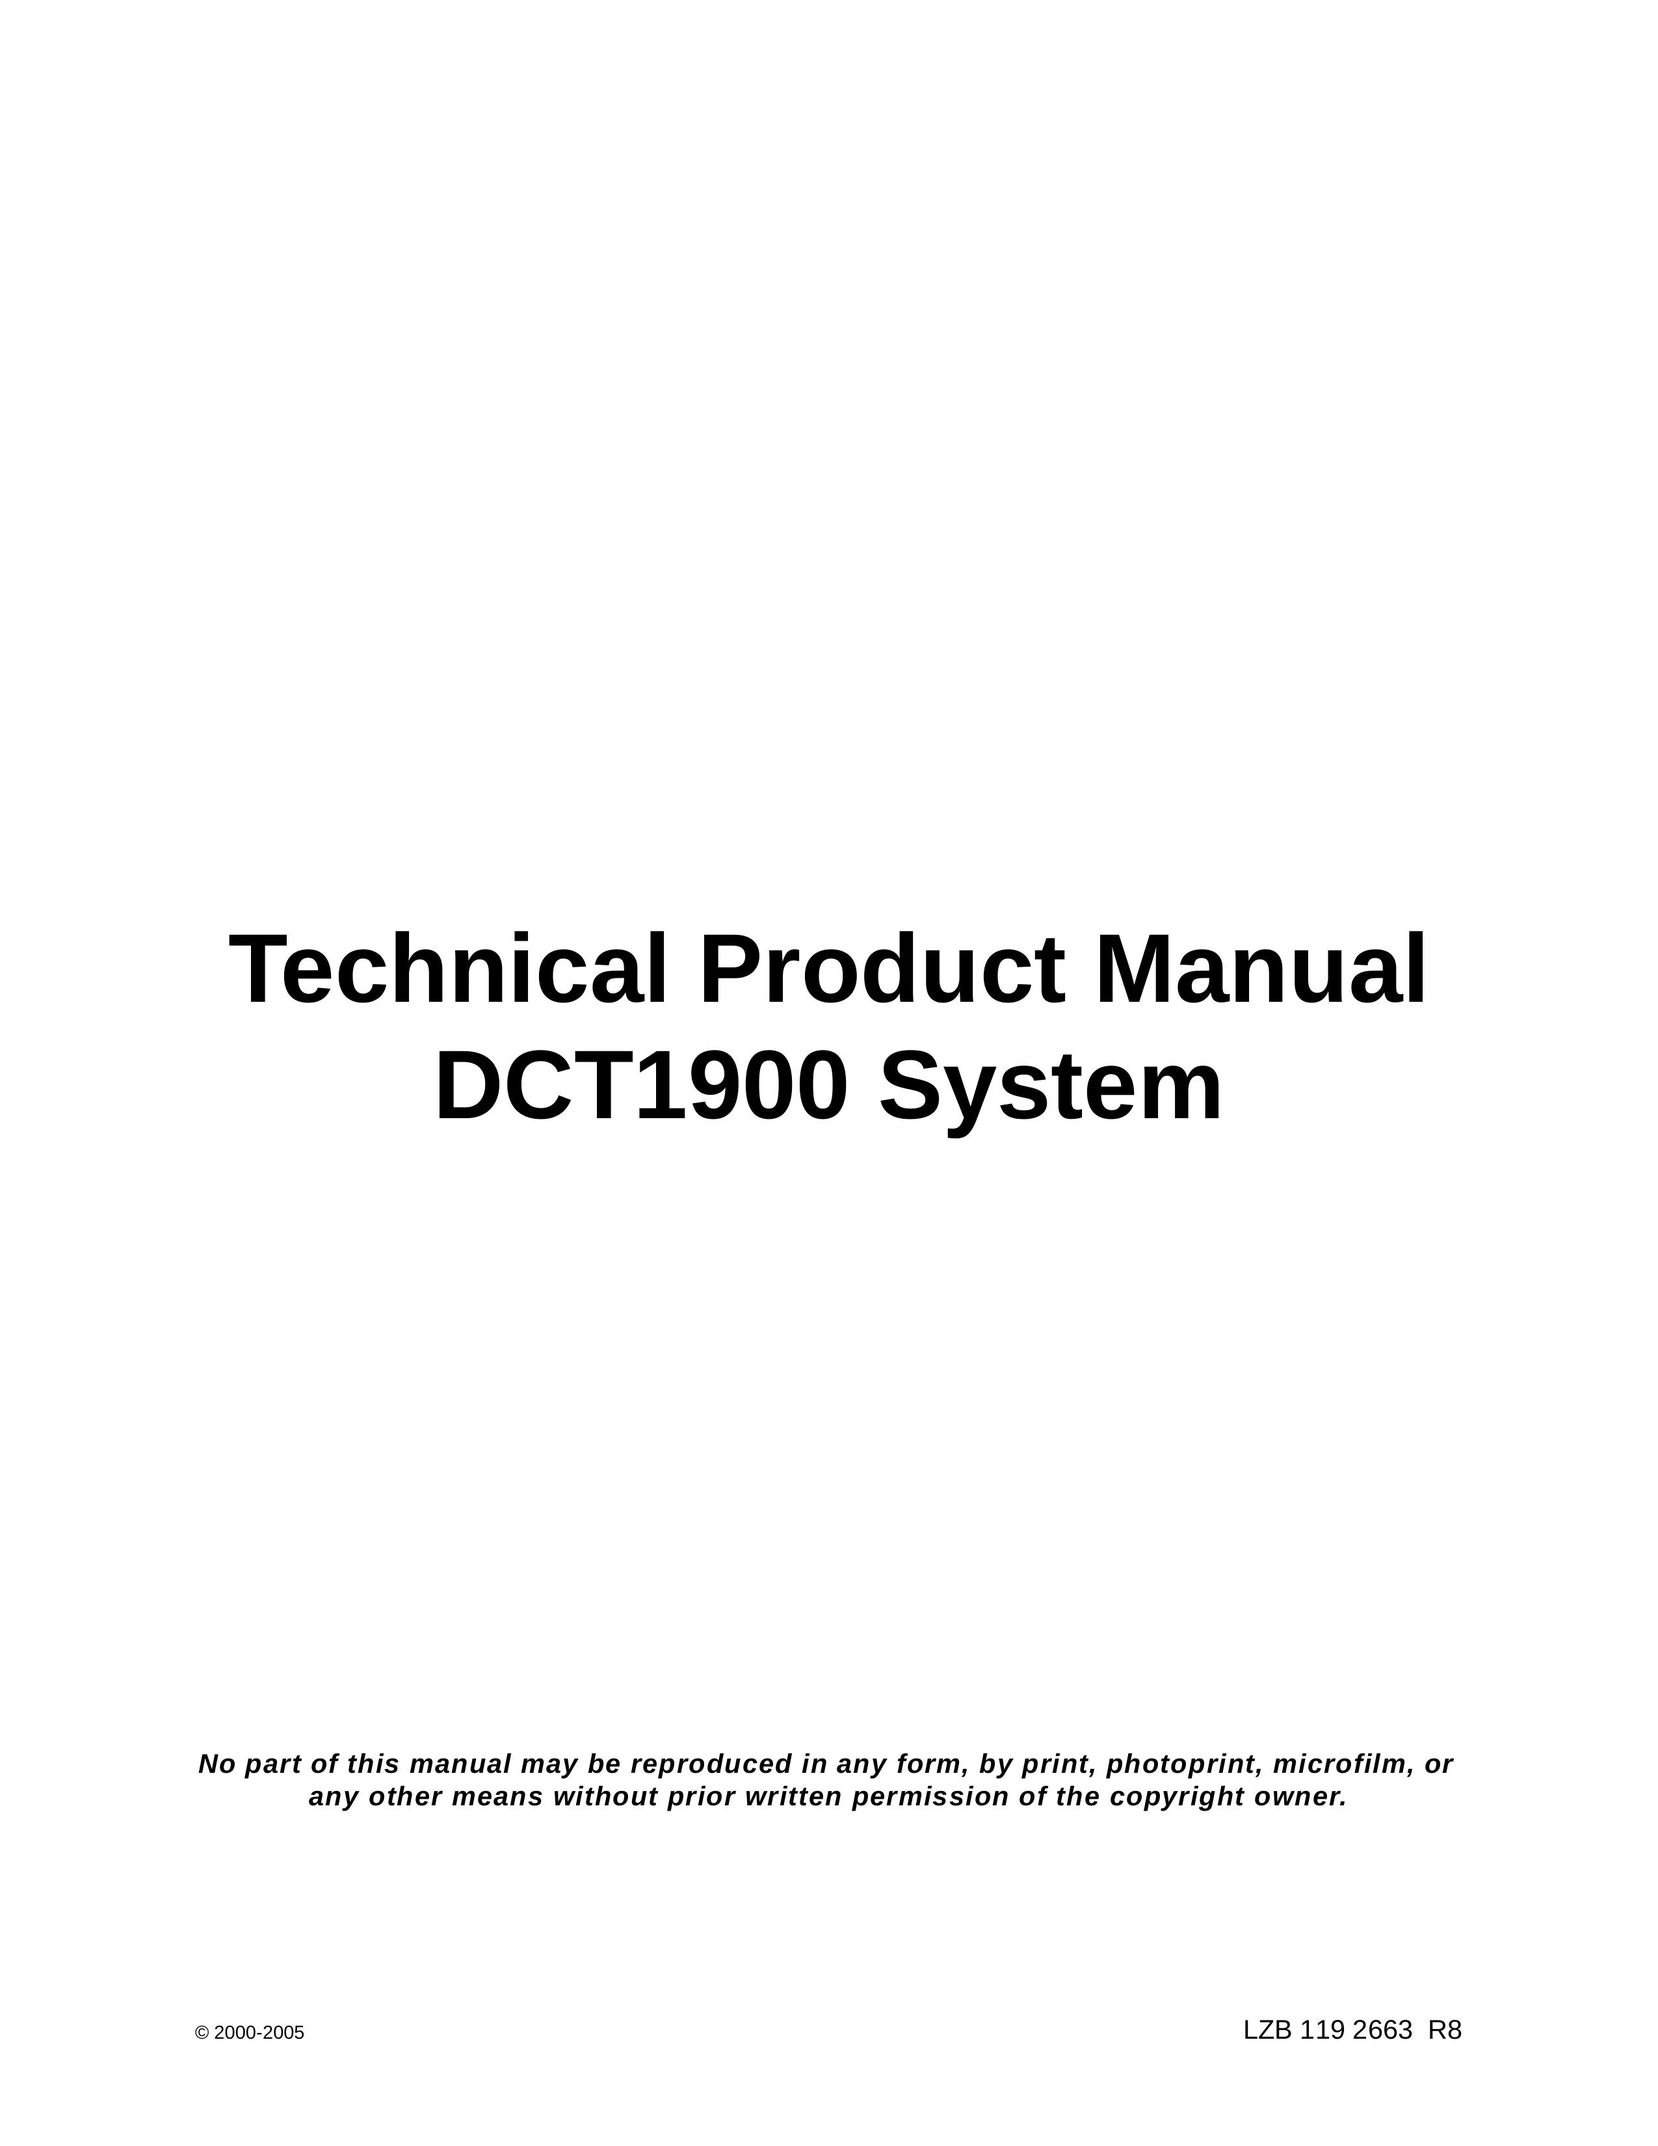 Nortel Networks DCT1900 Telephone User Manual